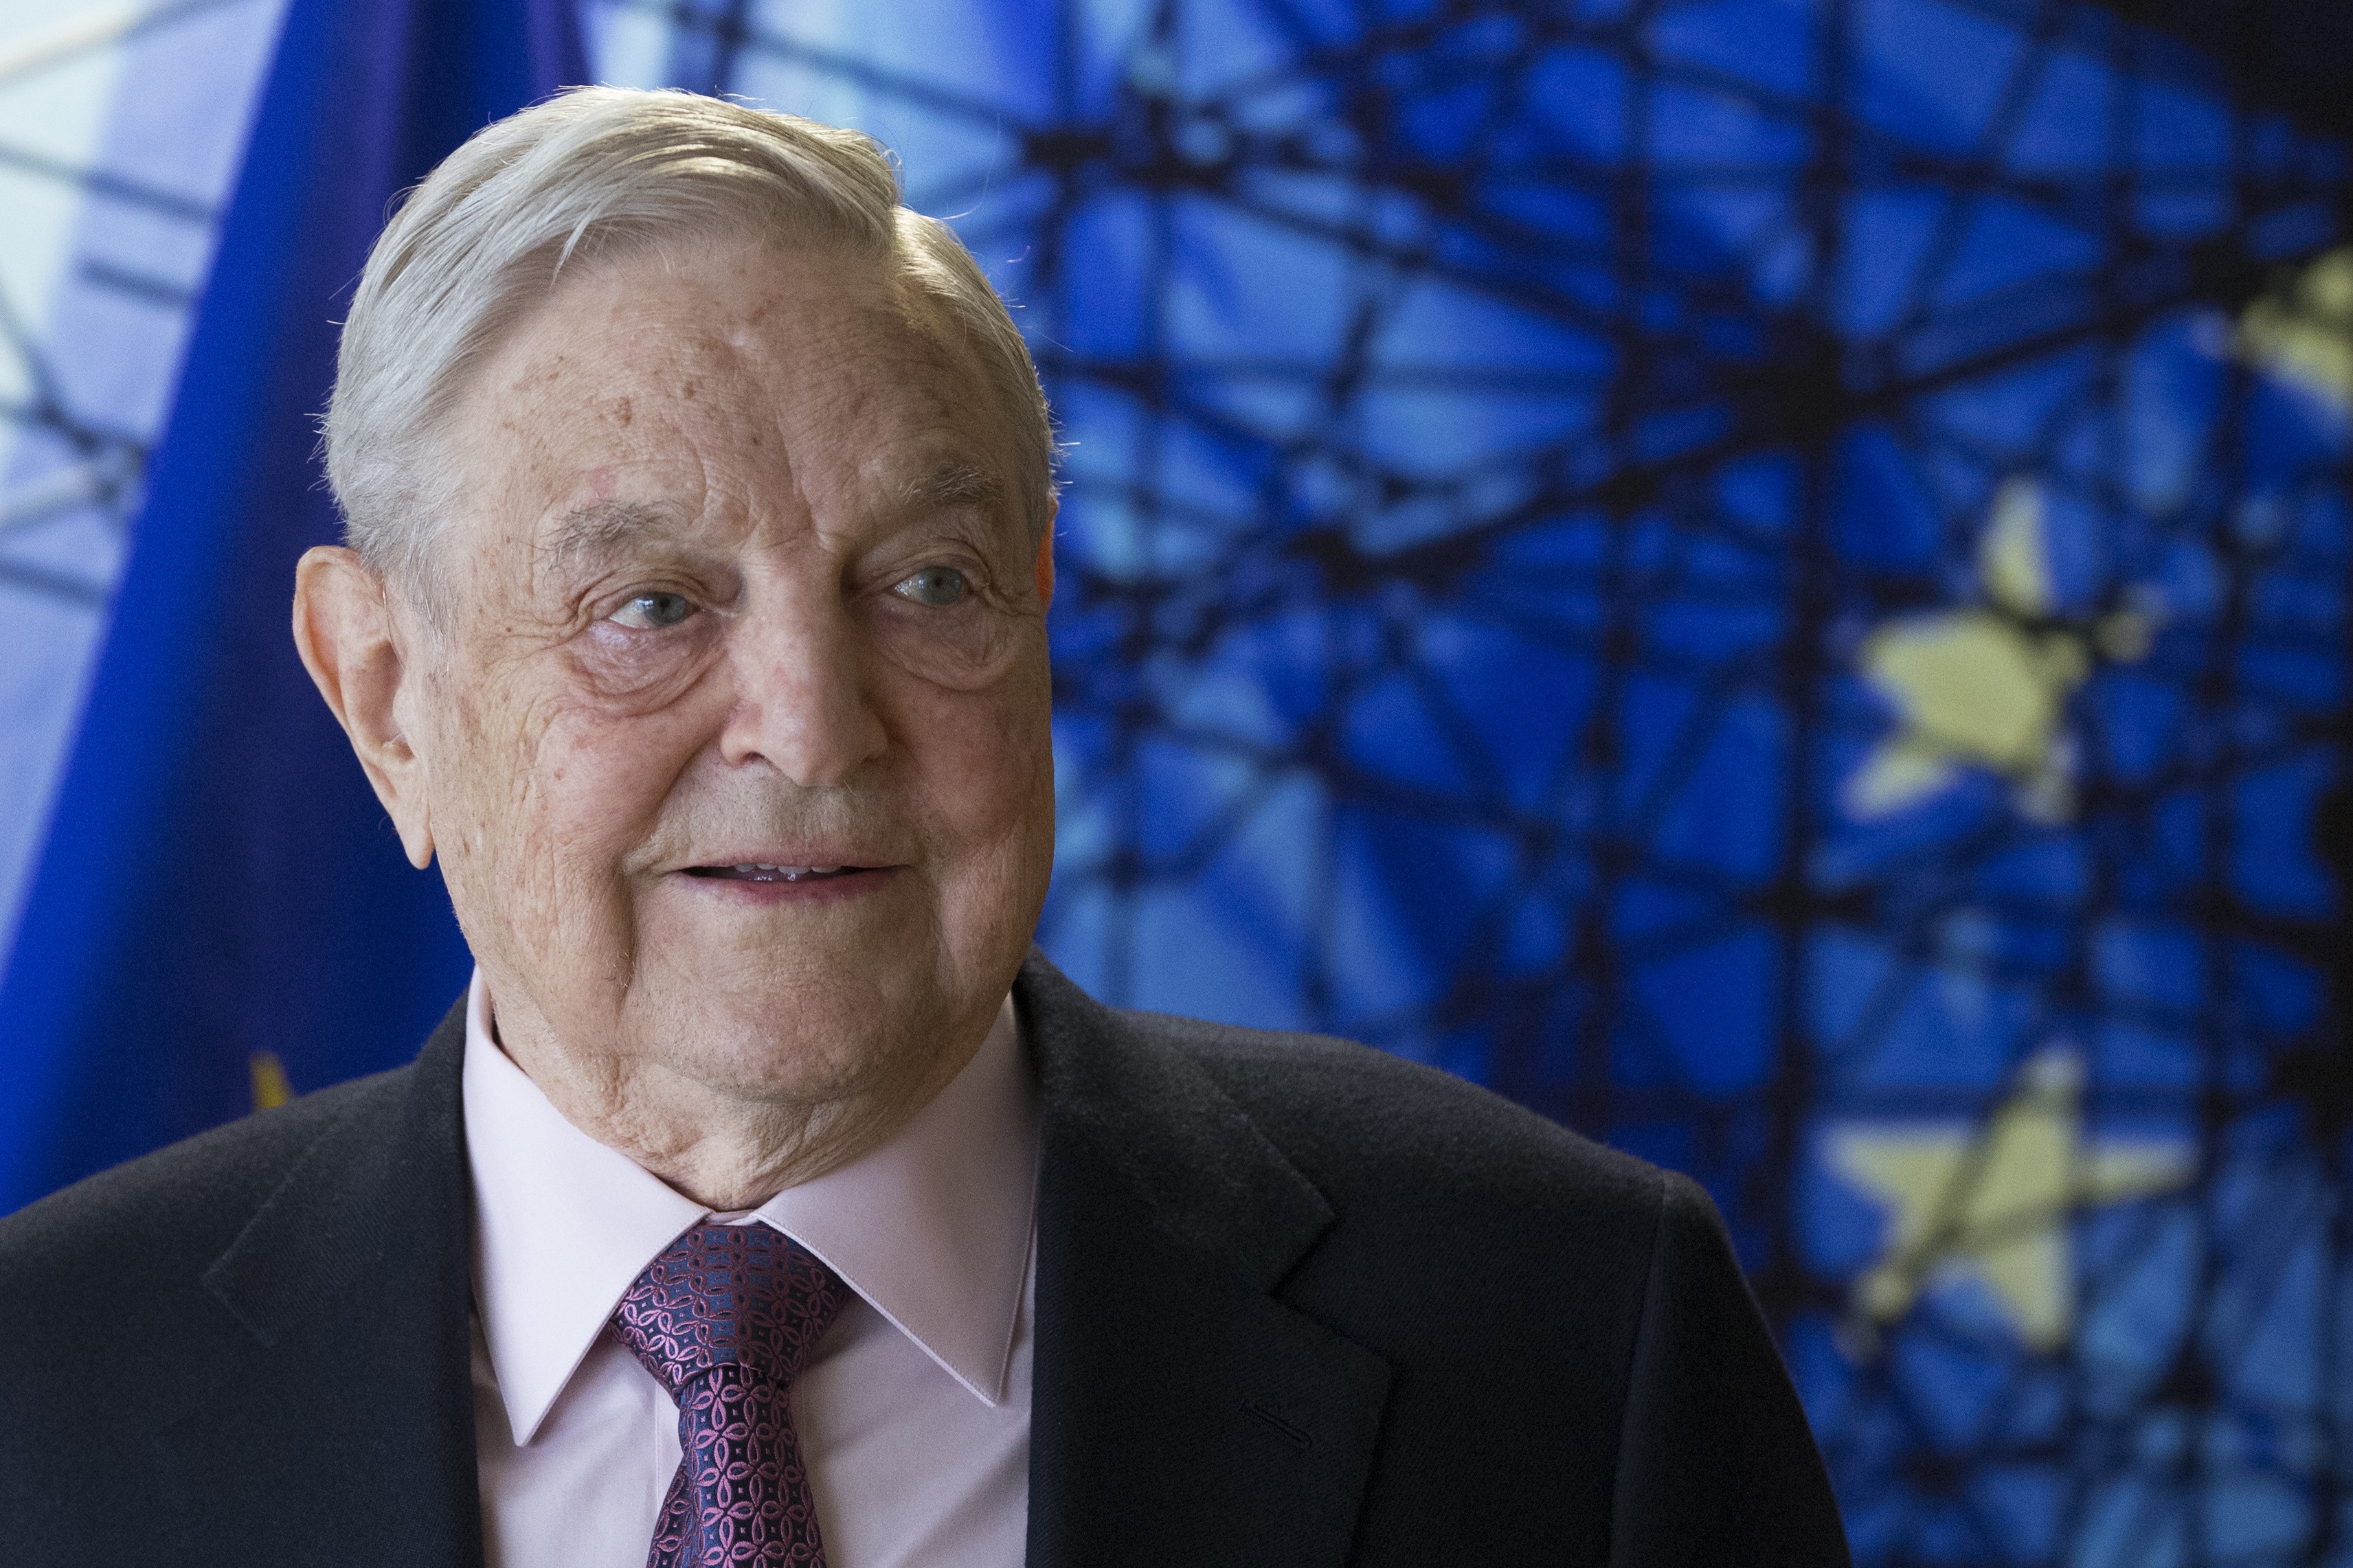 George Soros famously (or infamously) made a killing shorting the British pound on “Black Wednesday” in 1992, which resulted in Britain’s exit from the European Exchange Rate Mechanism. Photo: AFP